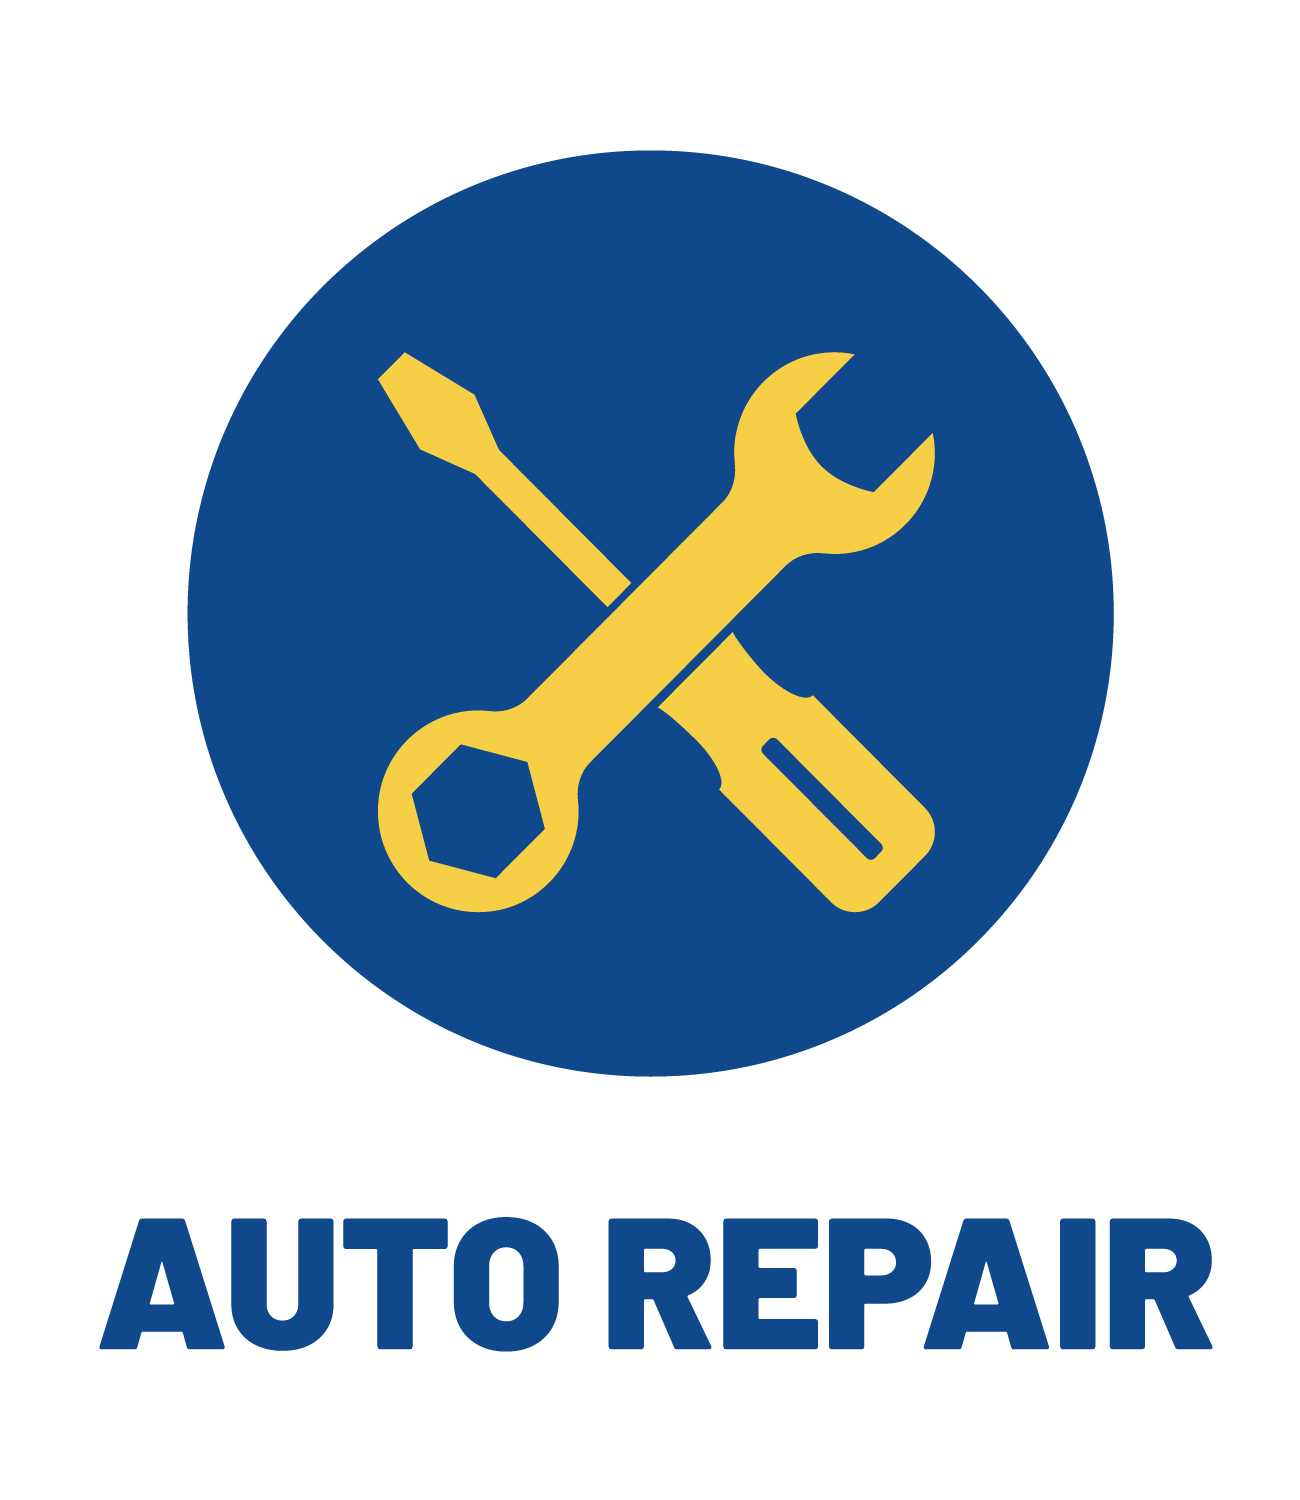 Learn more about auto repairs